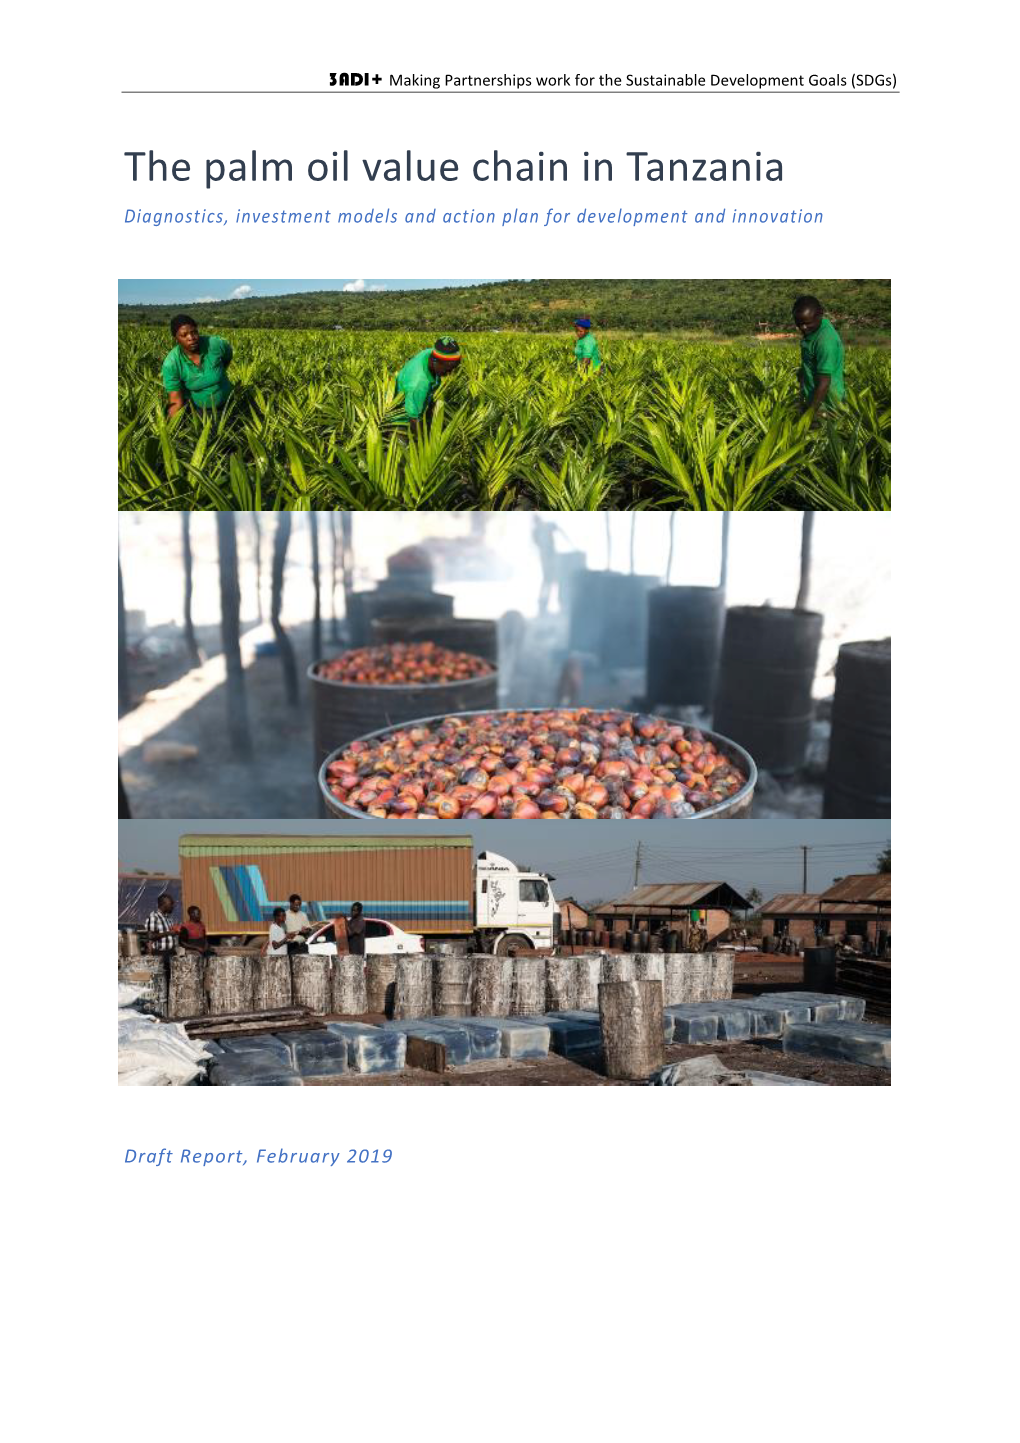 The Palm Oil Value Chain in Tanzania Diagnostics, Investment Models and Action Plan for Development and Innovation